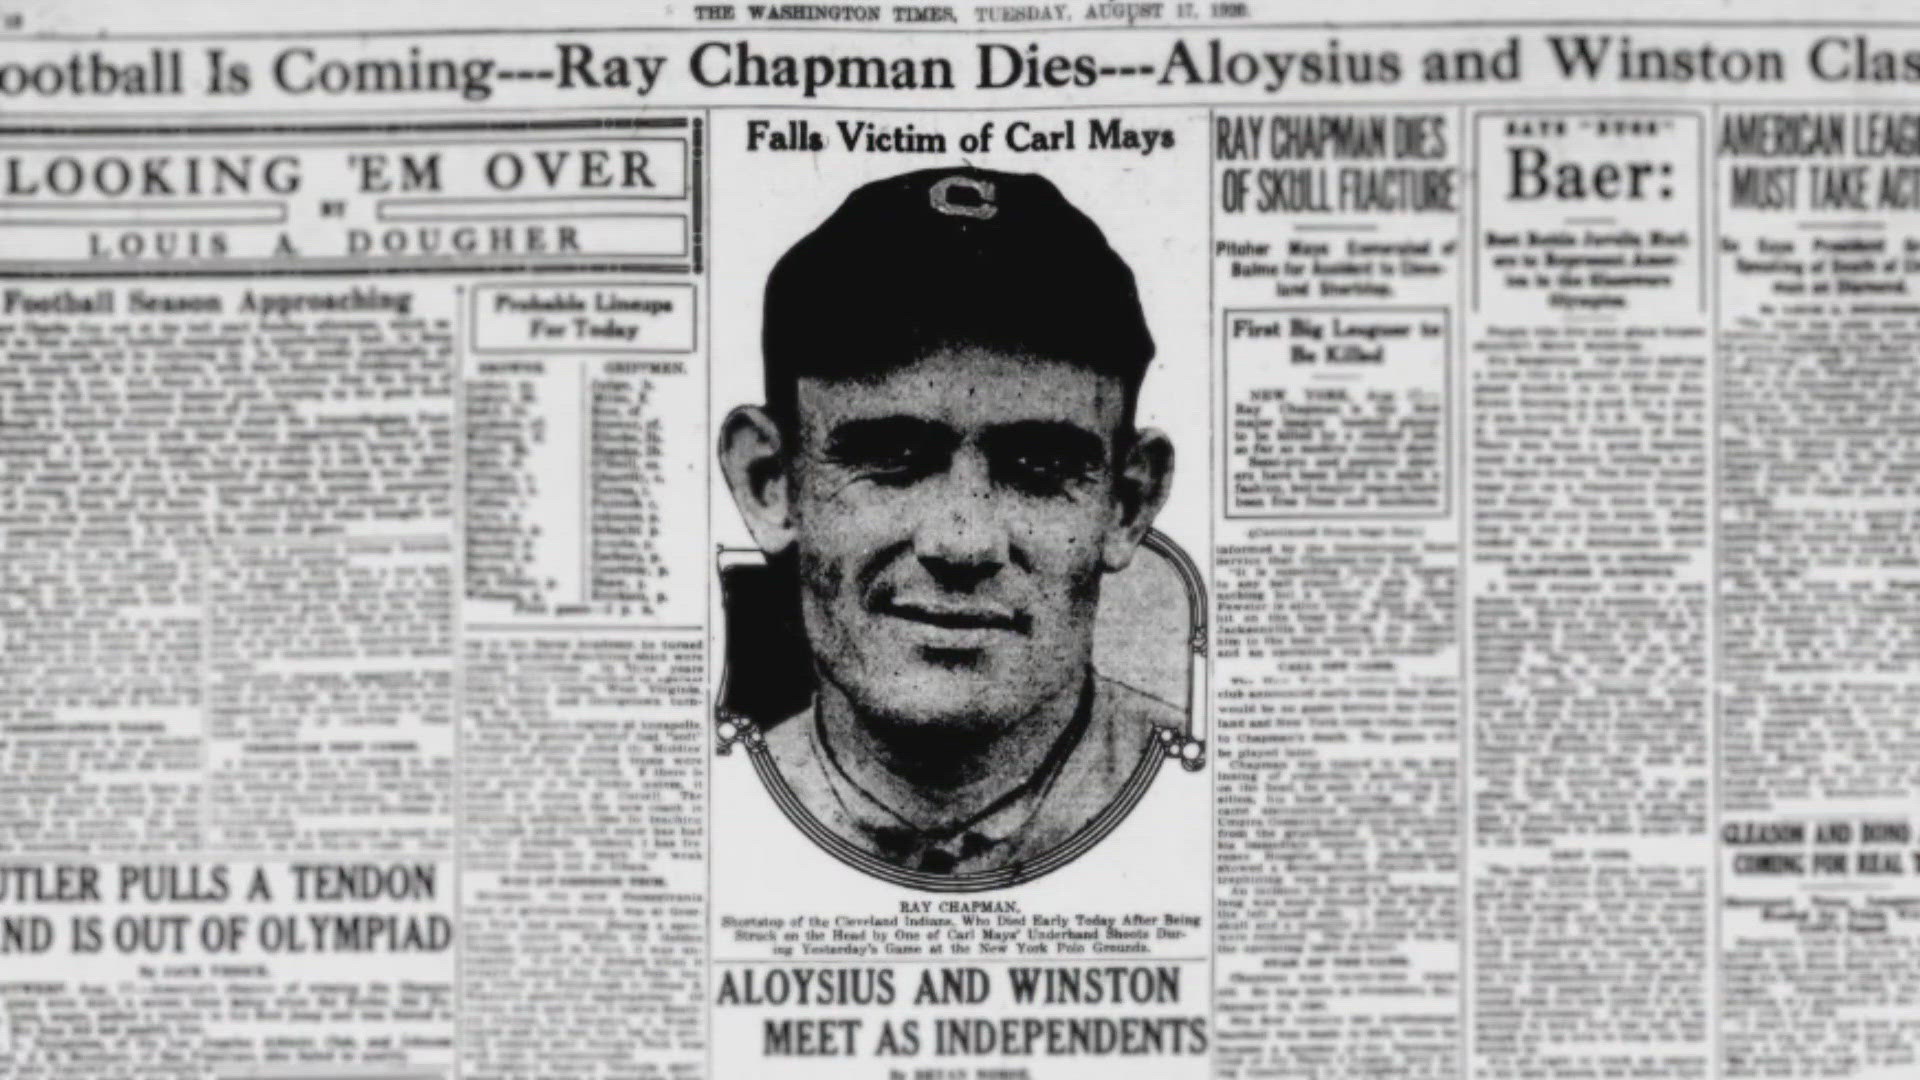 More than 100 years after his death, Chapman's Lake View Cemetery gravesite draws baseball fans captivated by his legacy.